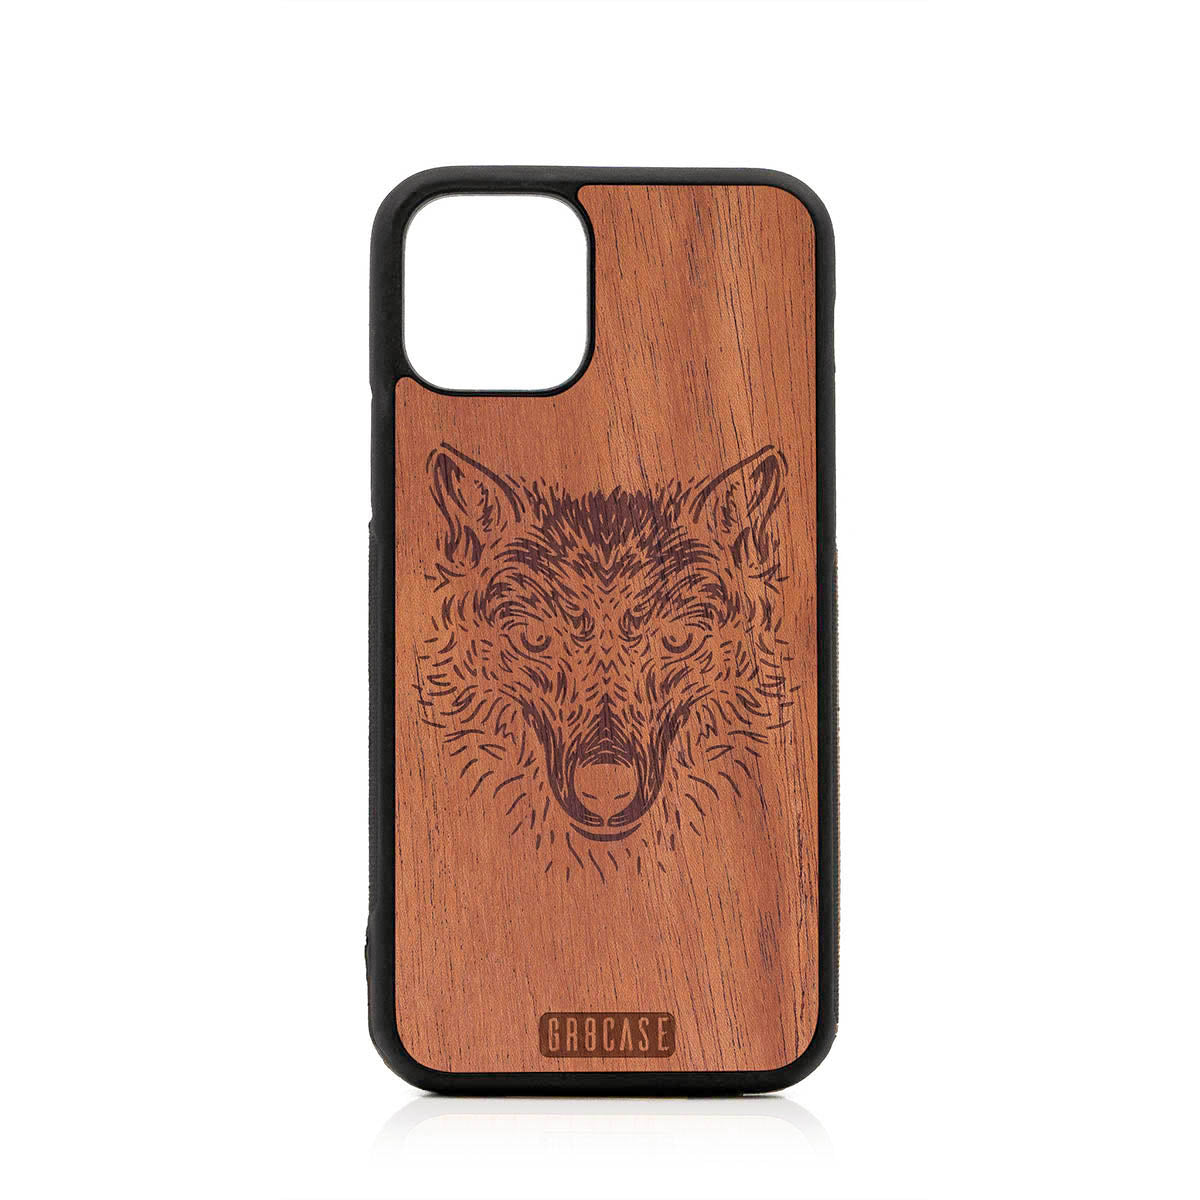 Furry Wolf Design Wood Case For iPhone 11 Pro